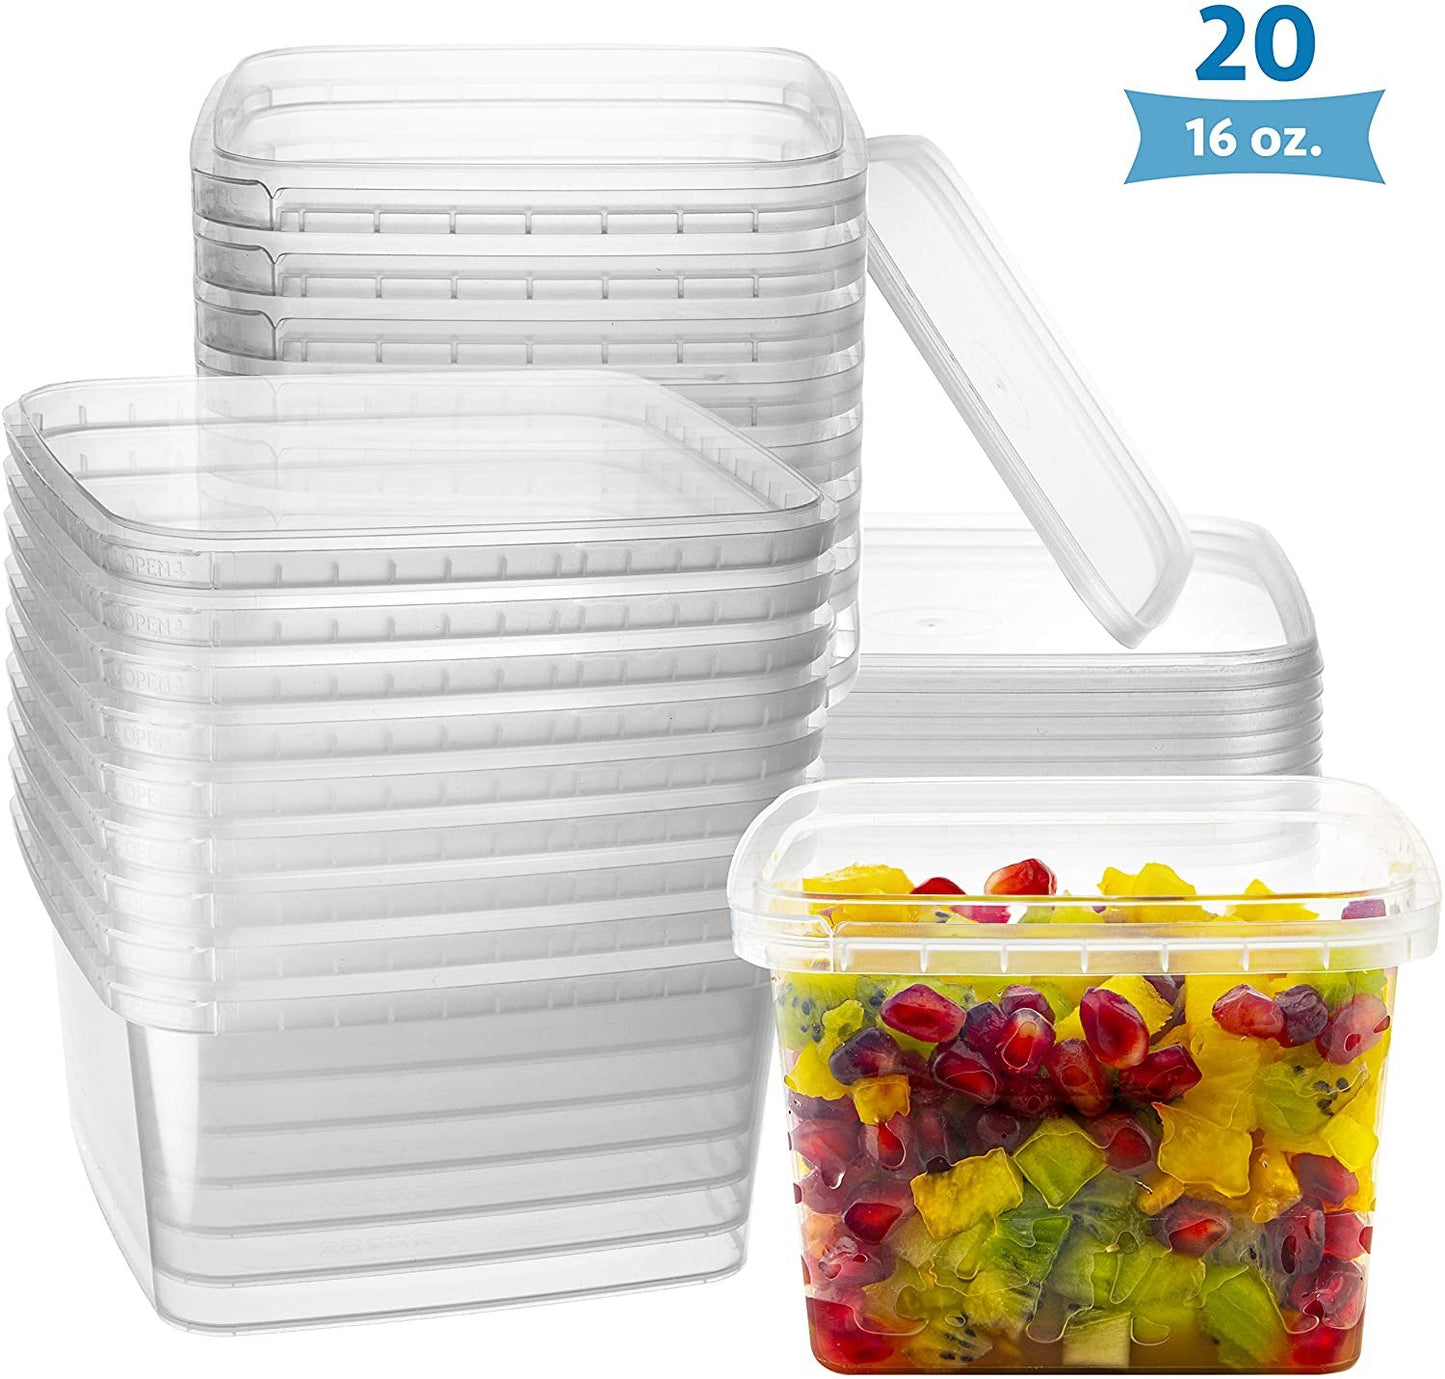 3pcs Food Storage Containers with Lids BPA-Free Leakproof Square Clear  Takeout Container Meal Prep Microwavable, Airtight Lids Reusable Plastic  Bento 